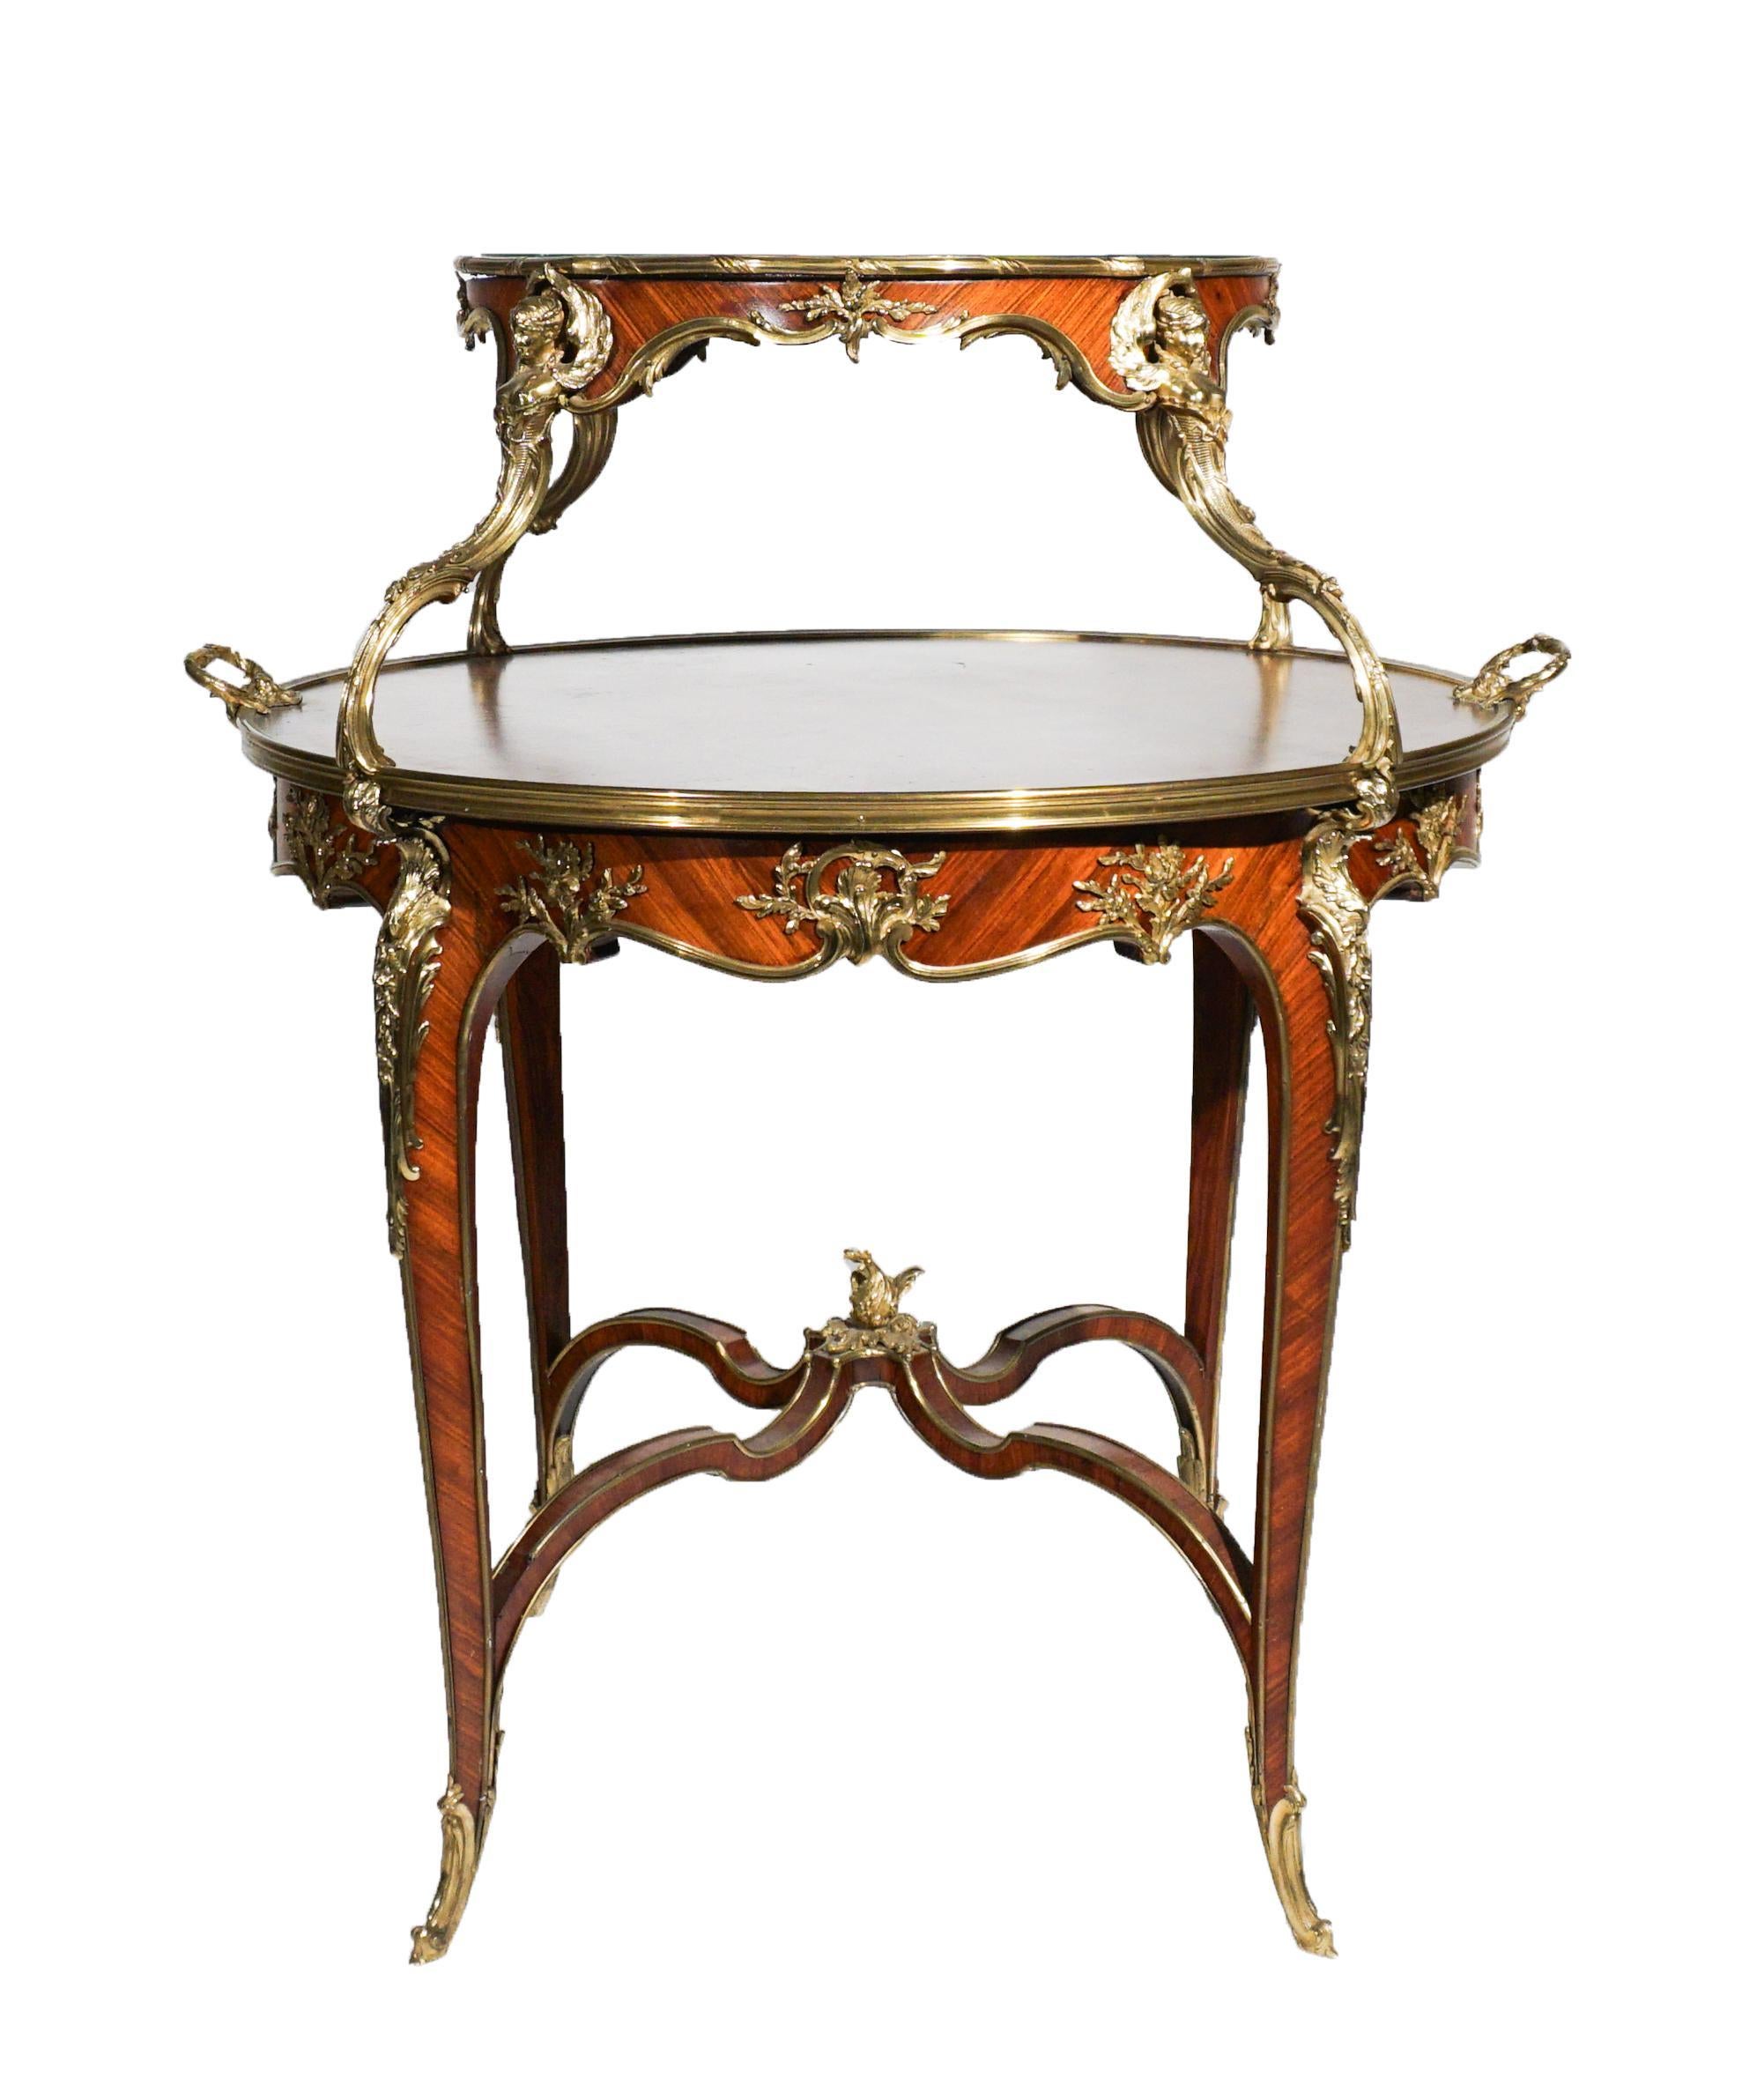 French 19th C. Joseph E. Zwiemer Kingwood, Satine and Bois de Bout Marquetry Tea Table For Sale